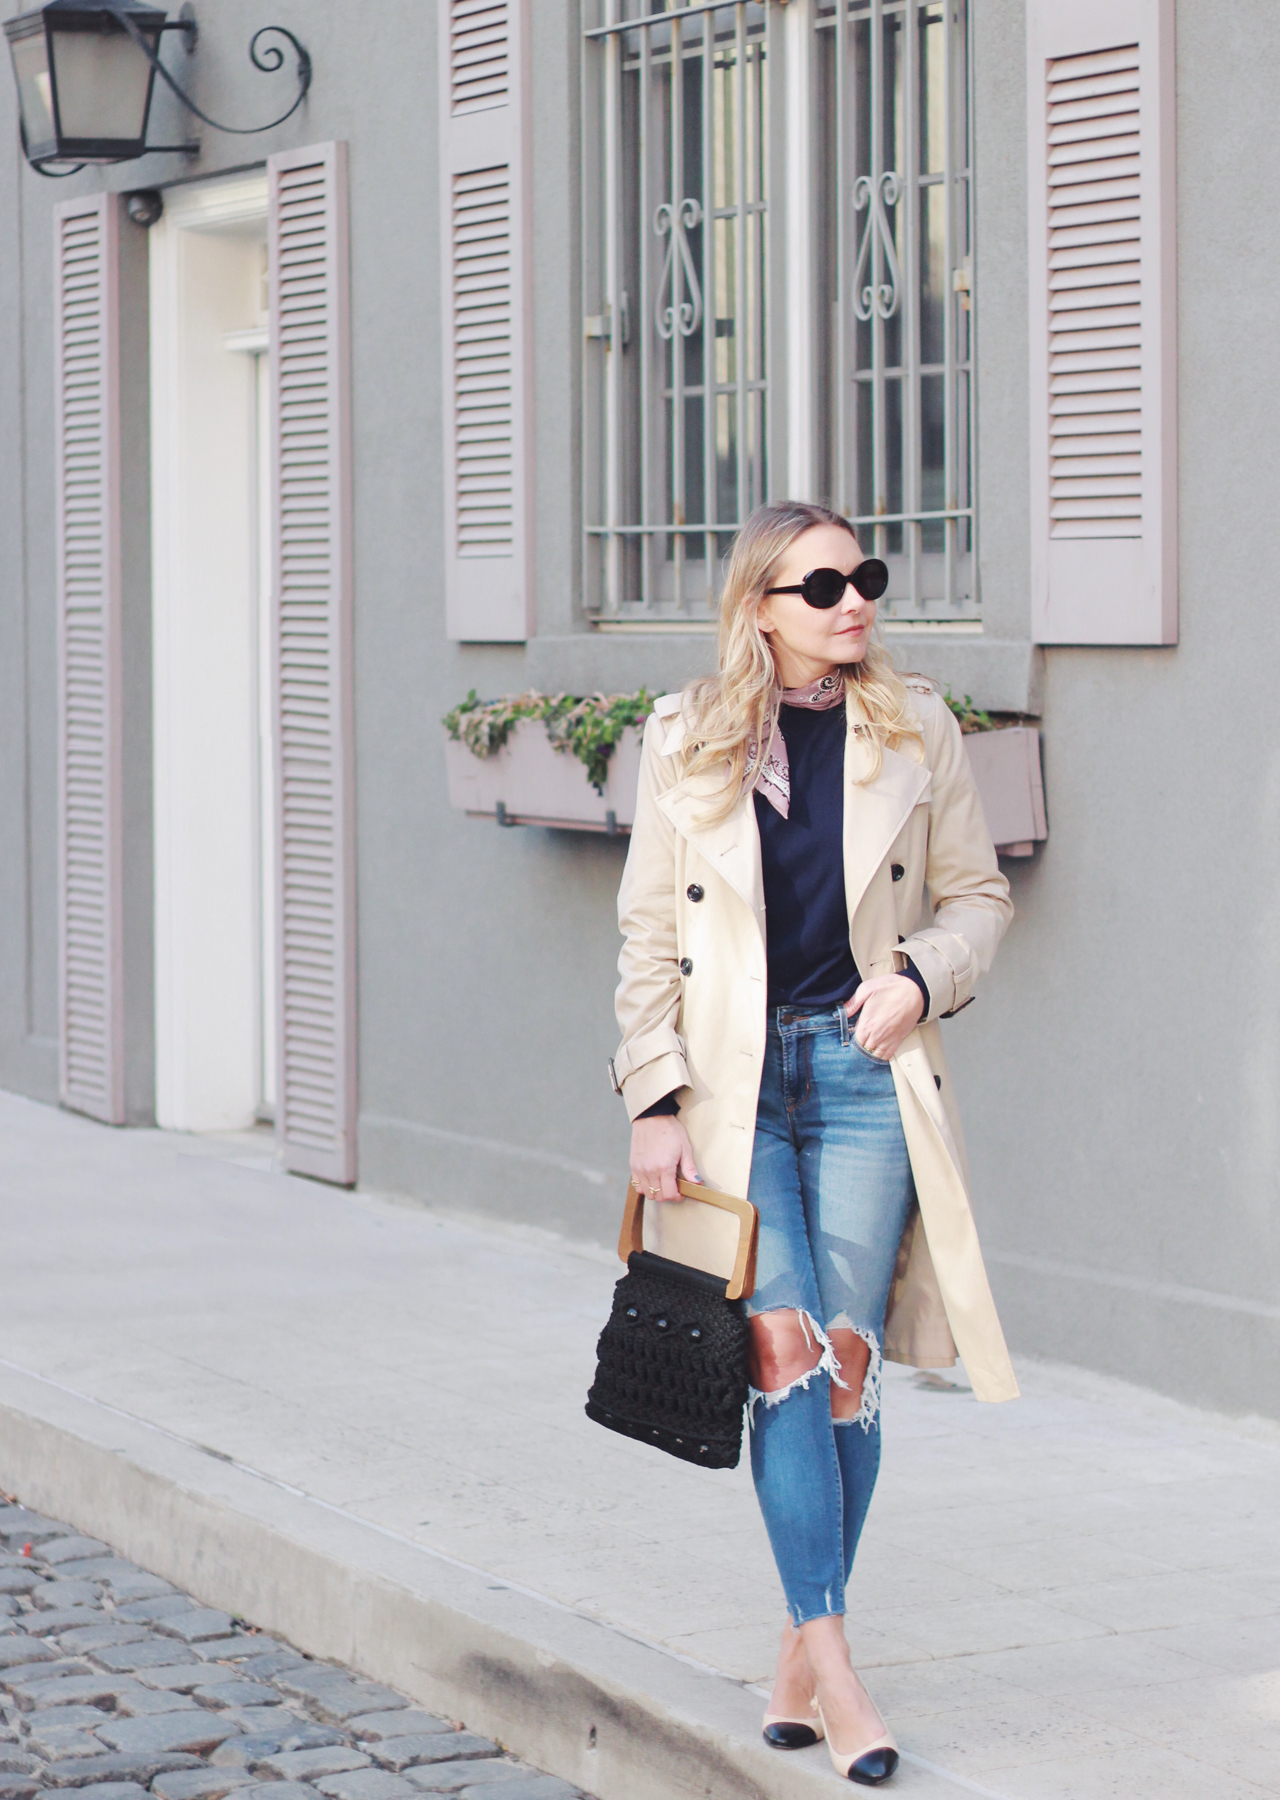 The Steele Maiden: Closet Classics - Trench Coat and Distressed Denim